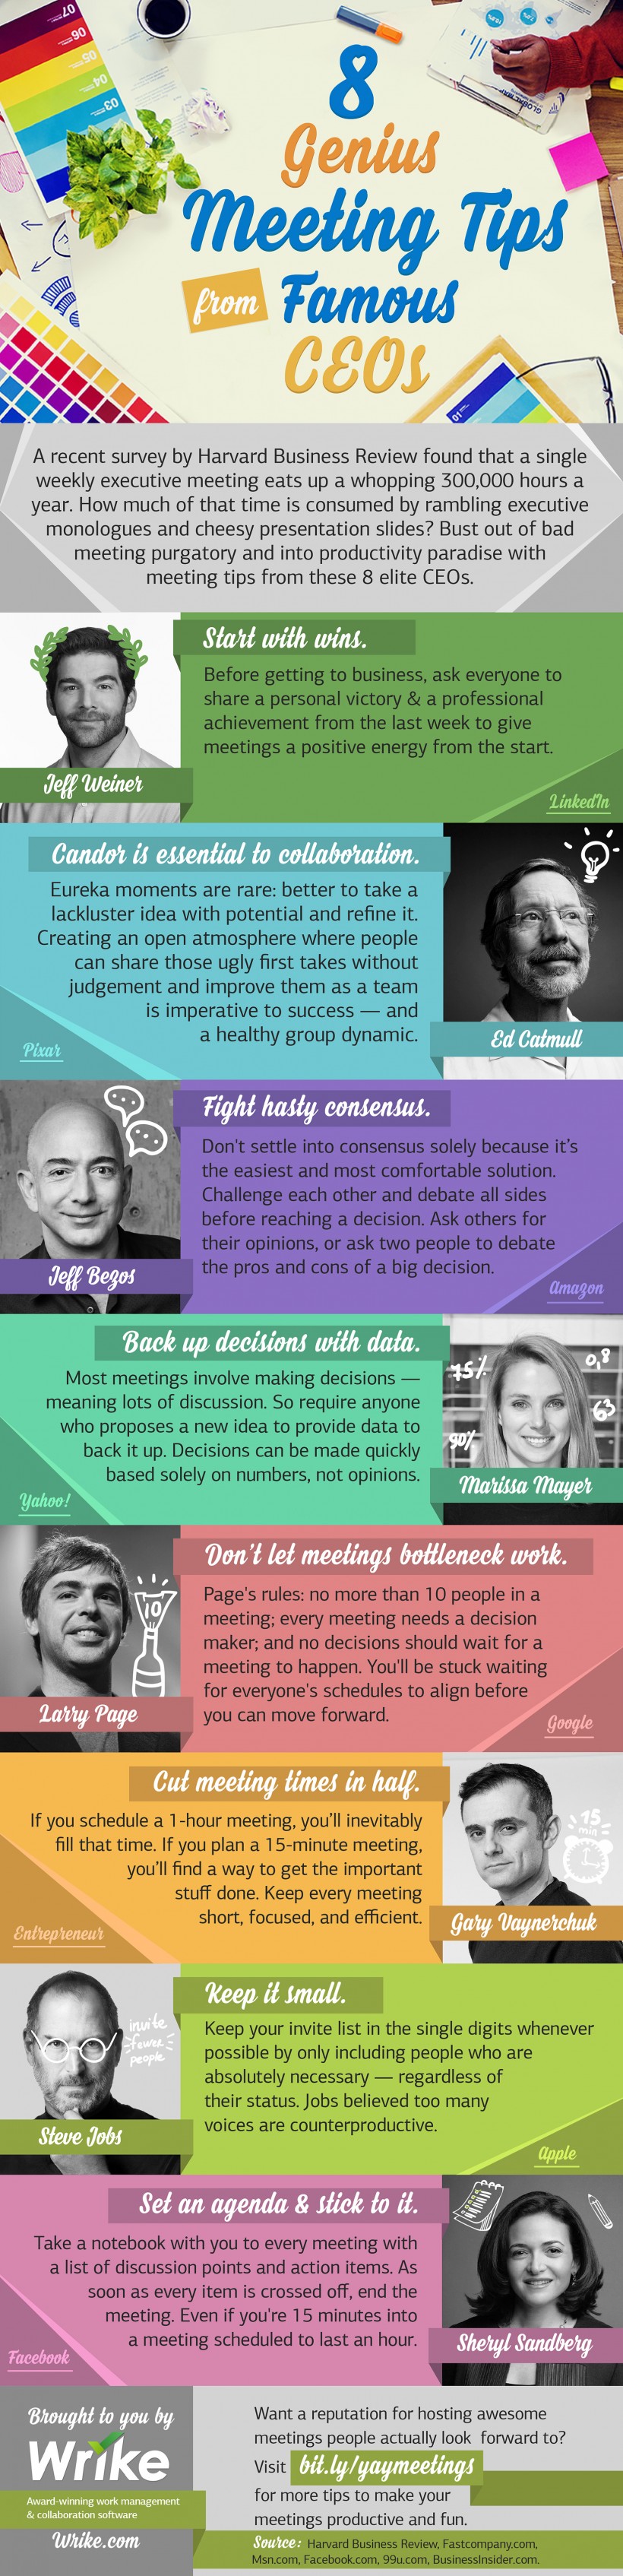 How Pixar, Google, and Facebook Fight Bad Meetings (Infographic)